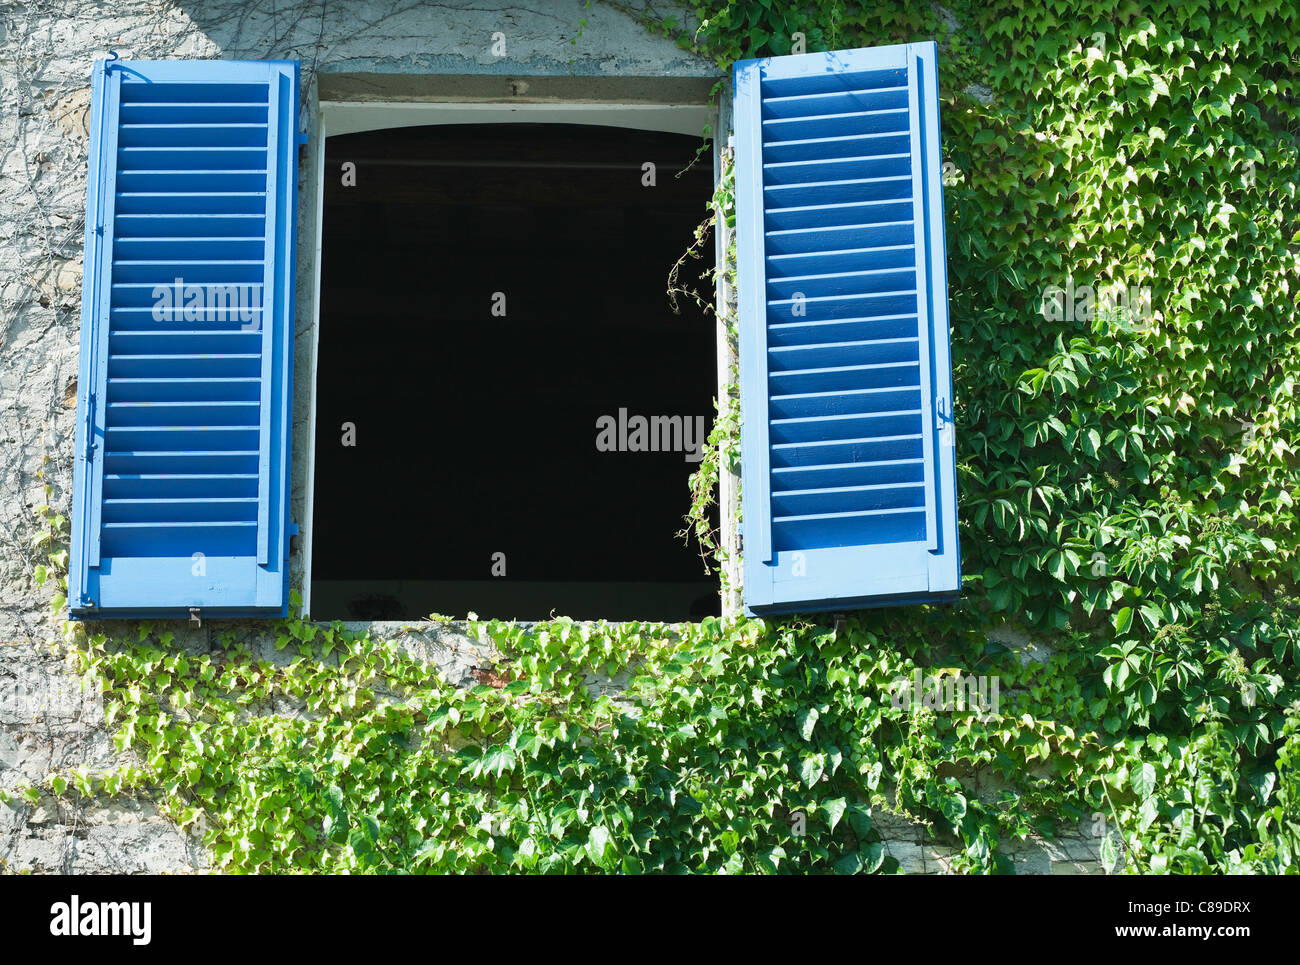 Italy, Tuscany, Open window with shutters and creepers growing on wall Stock Photo